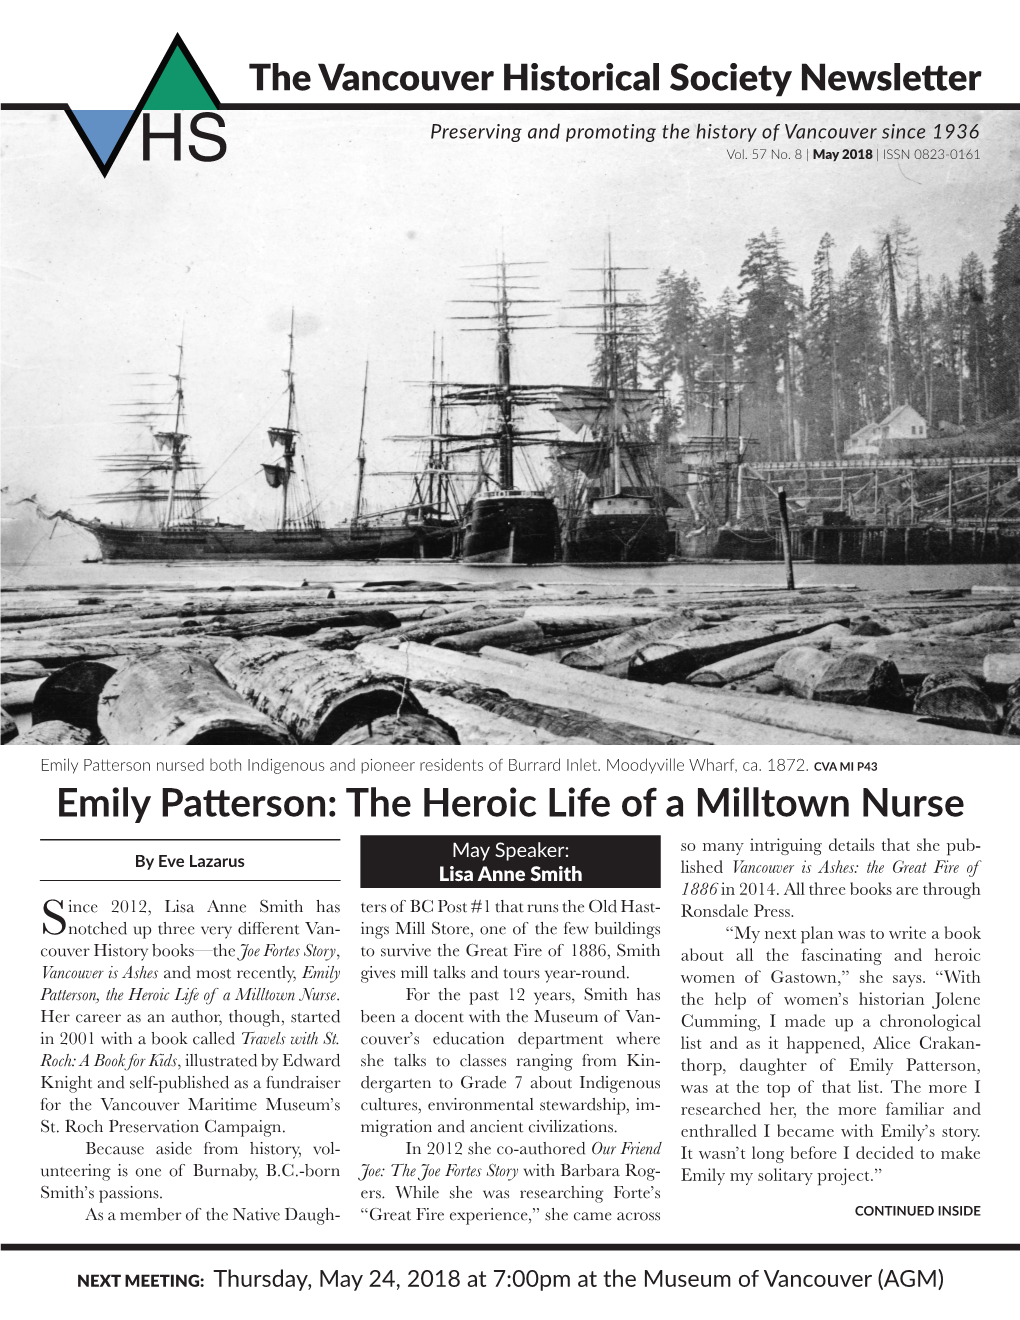 Emily Patterson Nursed Both Indigenous and Pioneer Residents of Burrard Inlet